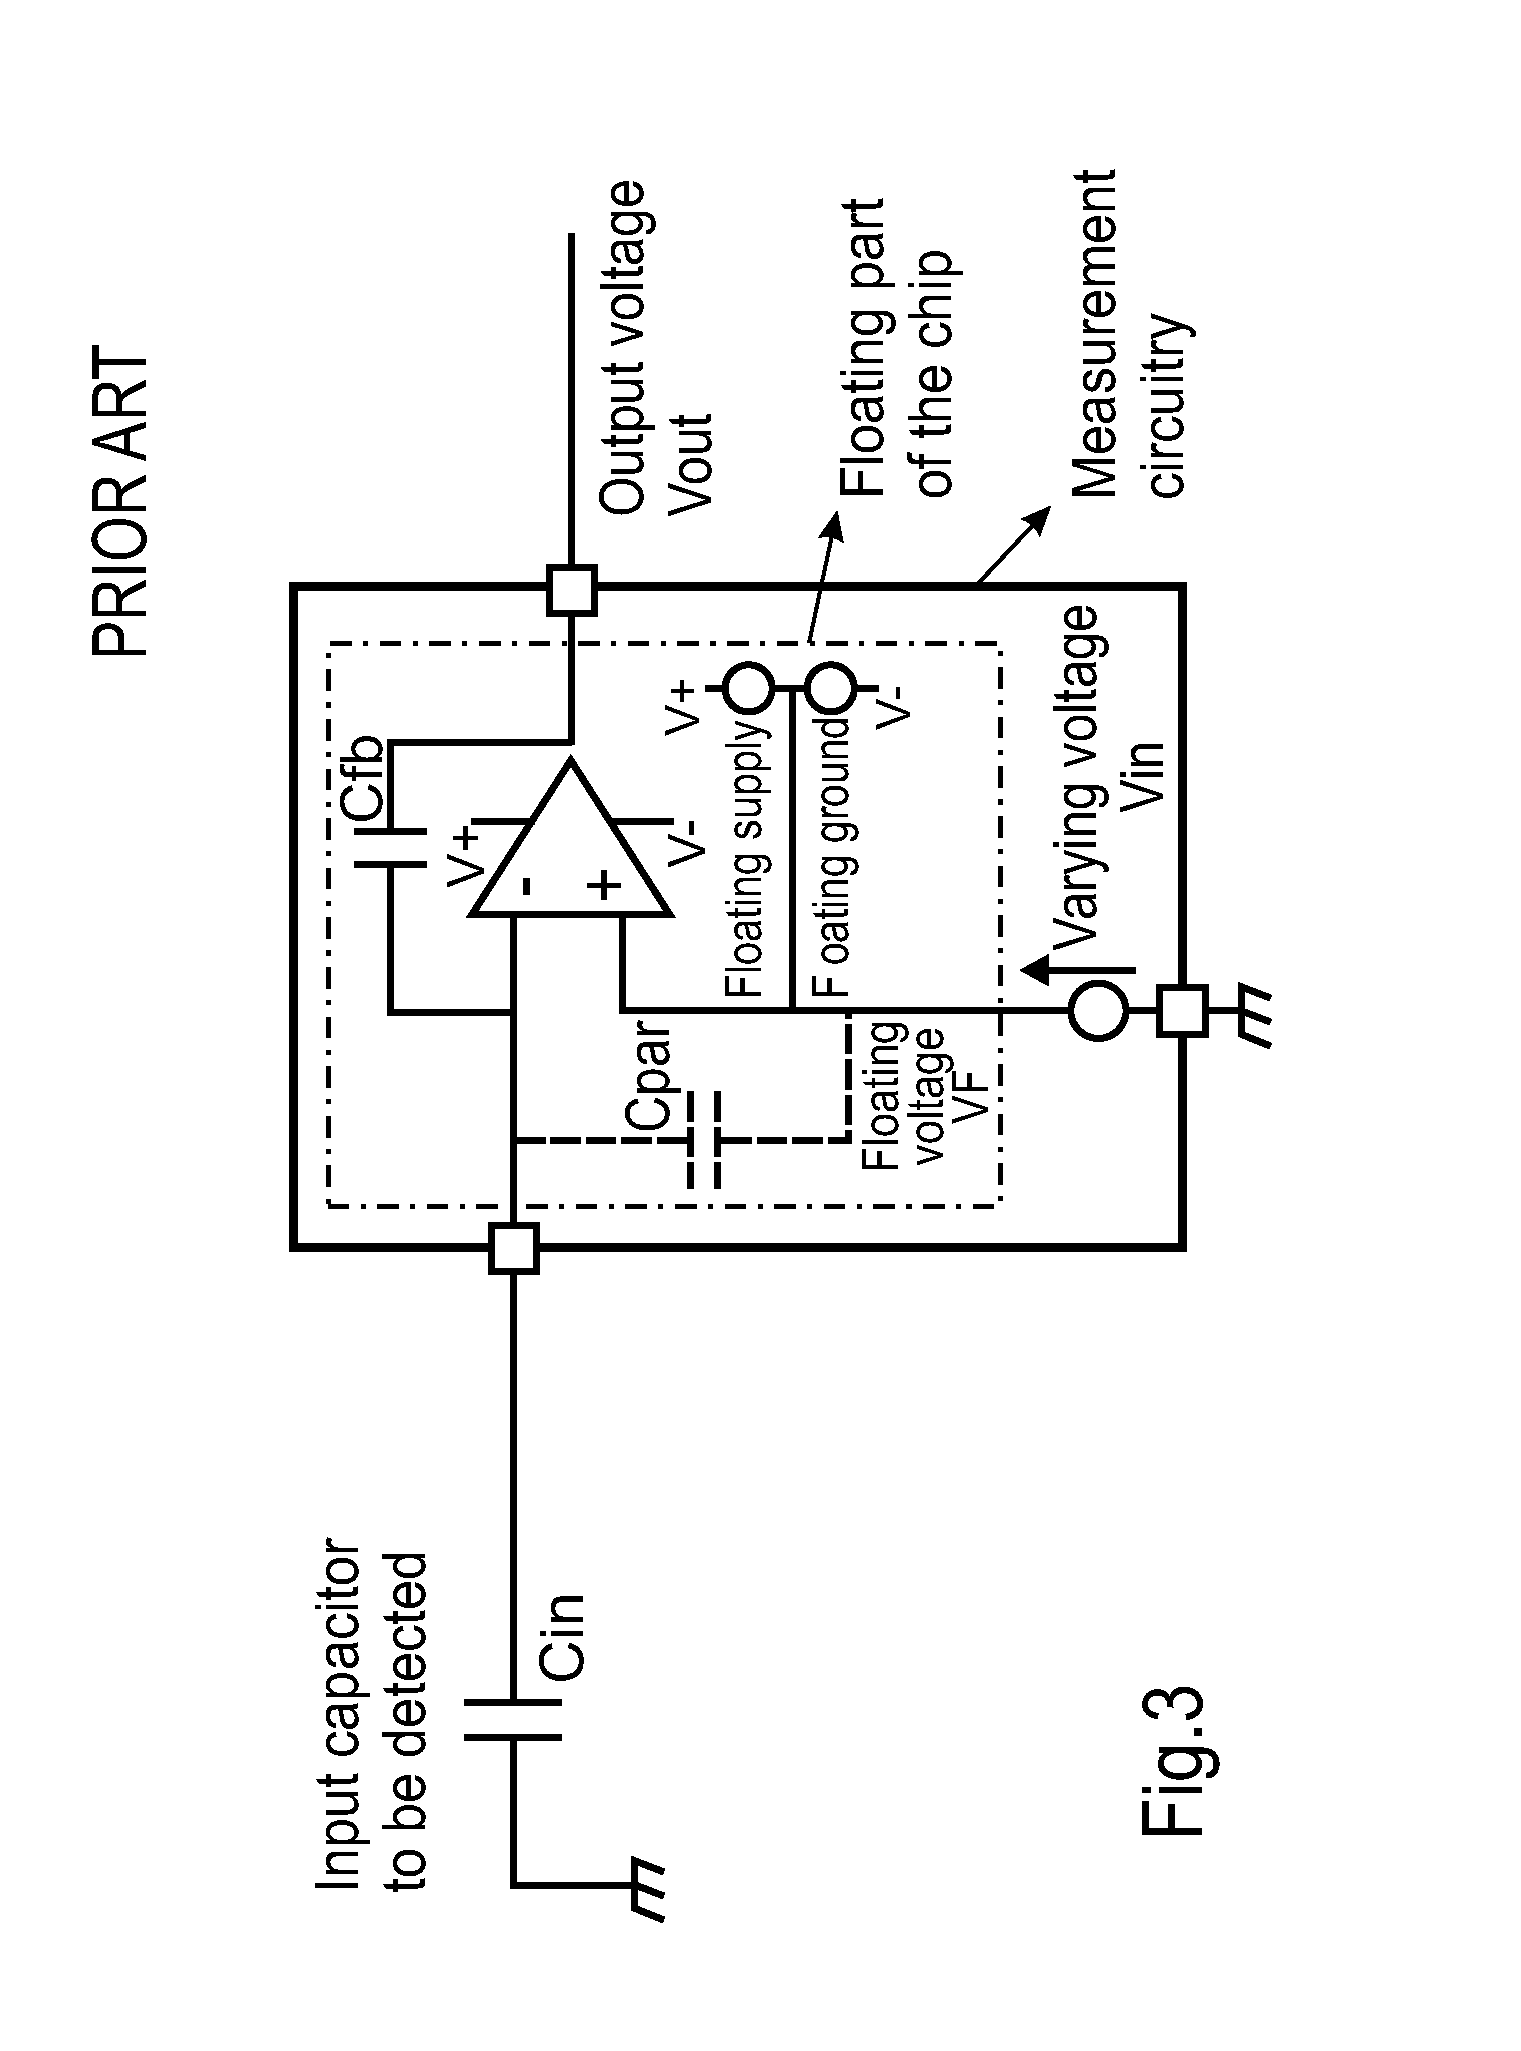 Capacitive sensing interface for proximity detection